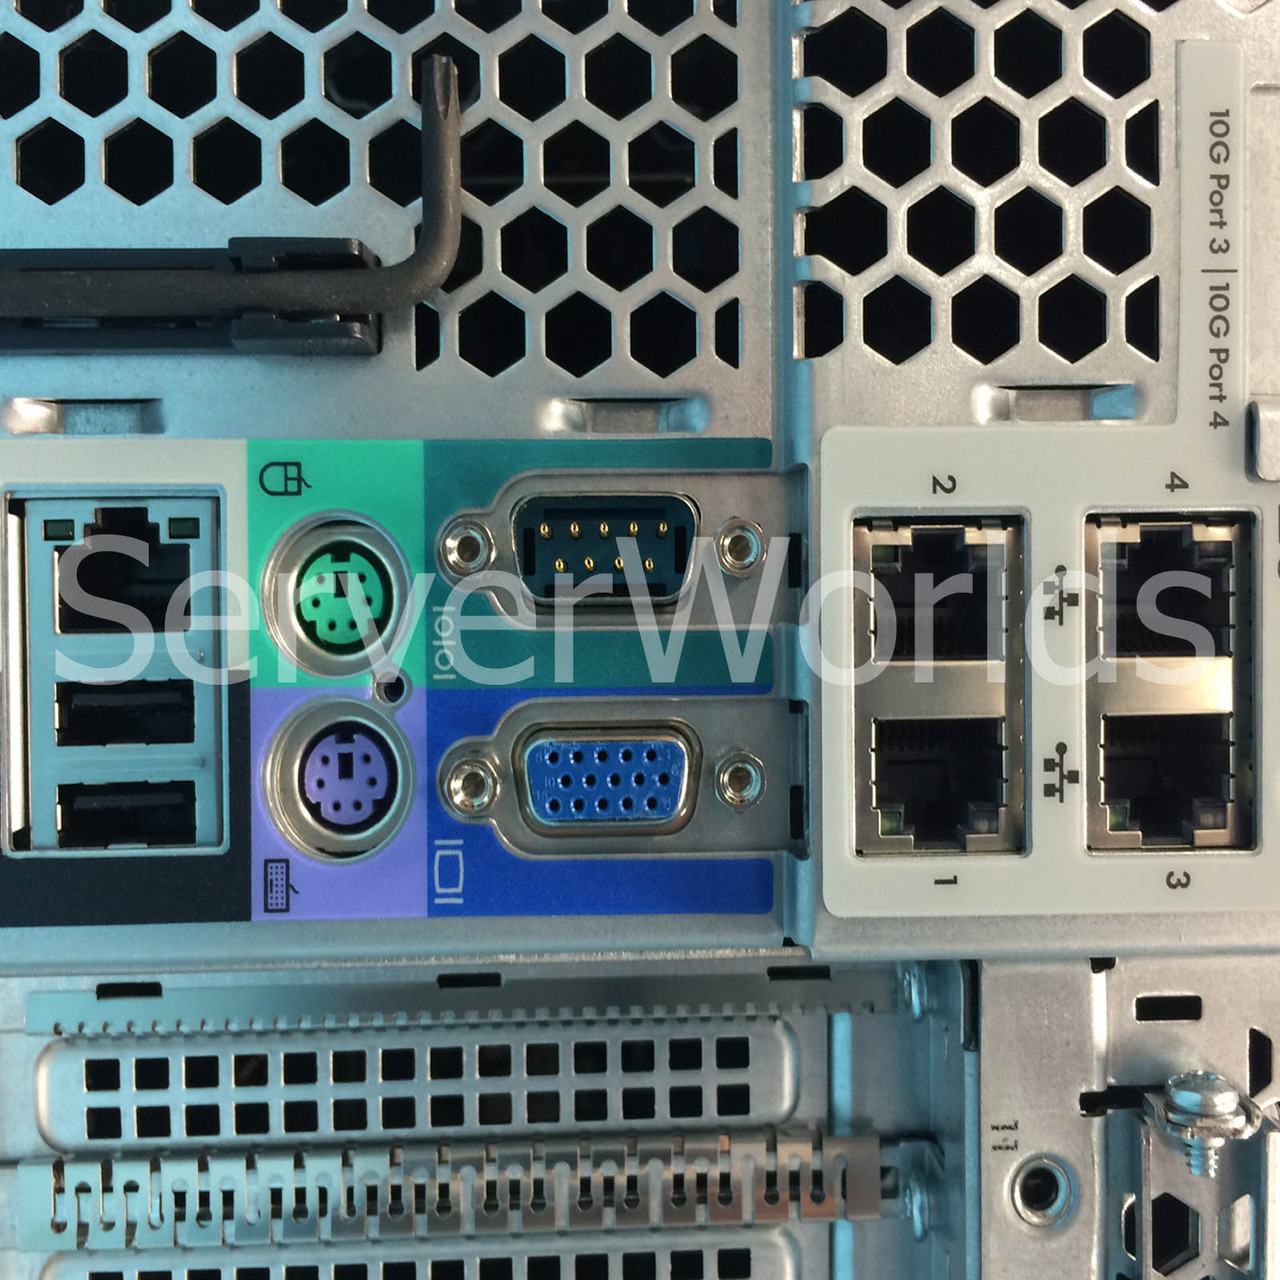 Refurbished HP DL580 G7, 4 x E7-4850 10C 2.0Ghz, 128GB 643064-001 Plugs & Outlets